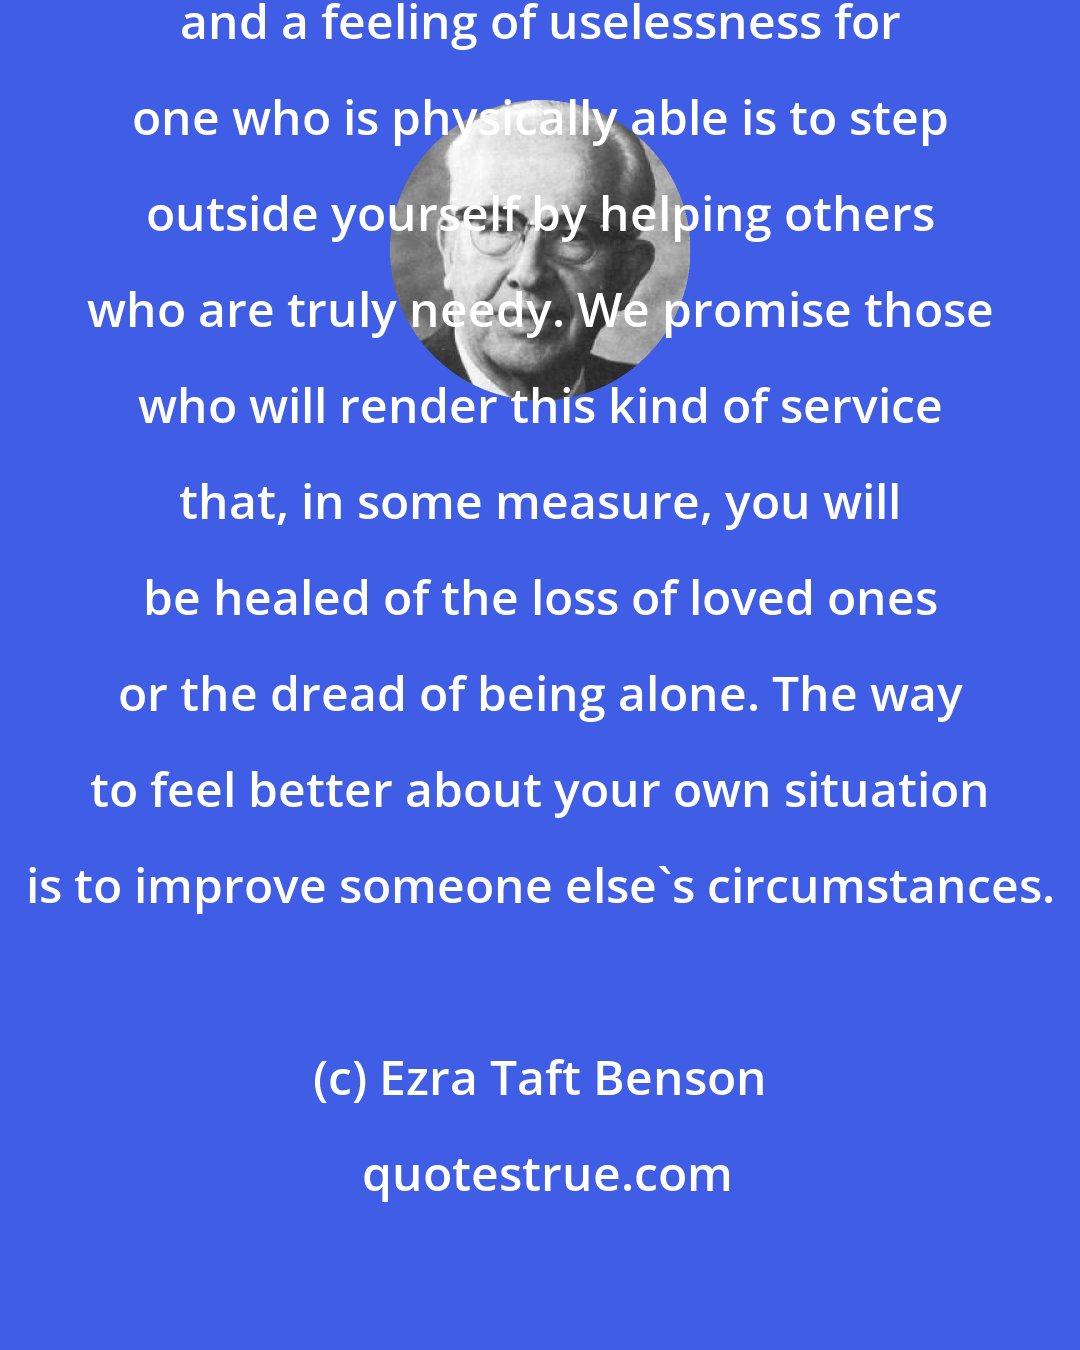 Ezra Taft Benson: The key to overcoming aloneness and a feeling of uselessness for one who is physically able is to step outside yourself by helping others who are truly needy. We promise those who will render this kind of service that, in some measure, you will be healed of the loss of loved ones or the dread of being alone. The way to feel better about your own situation is to improve someone else's circumstances.